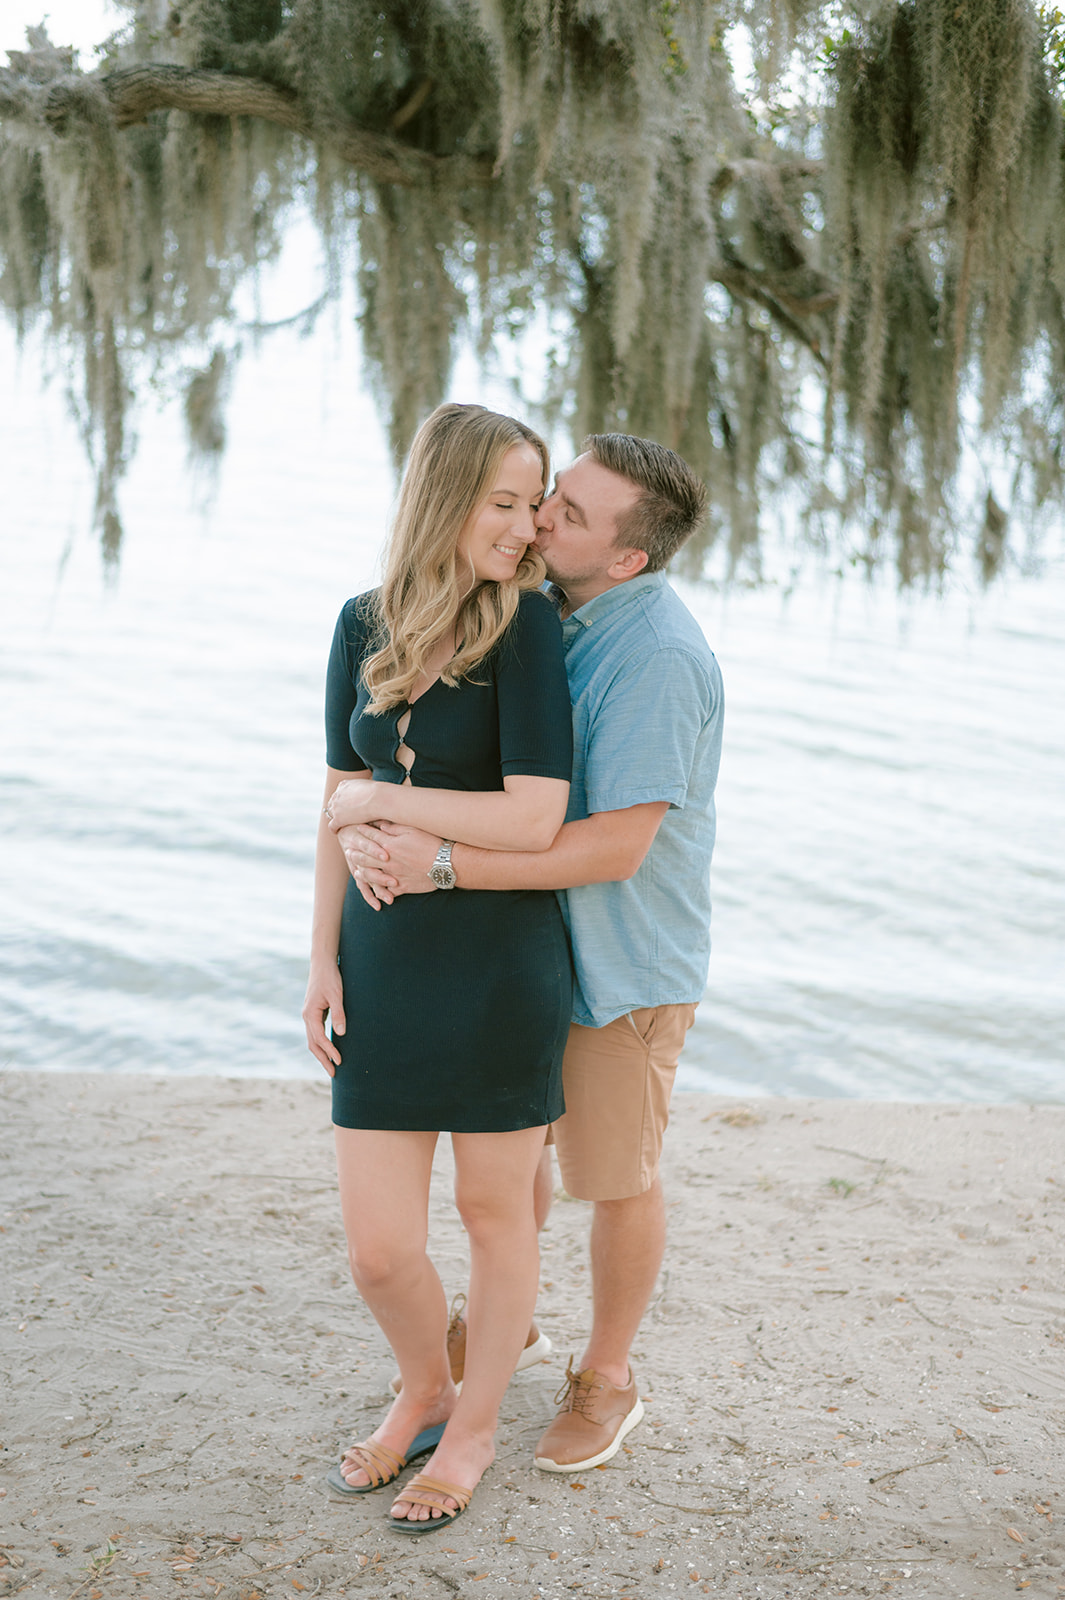 "Outdoor engagement photography with the sunshine and breeze at Philippe Park"
